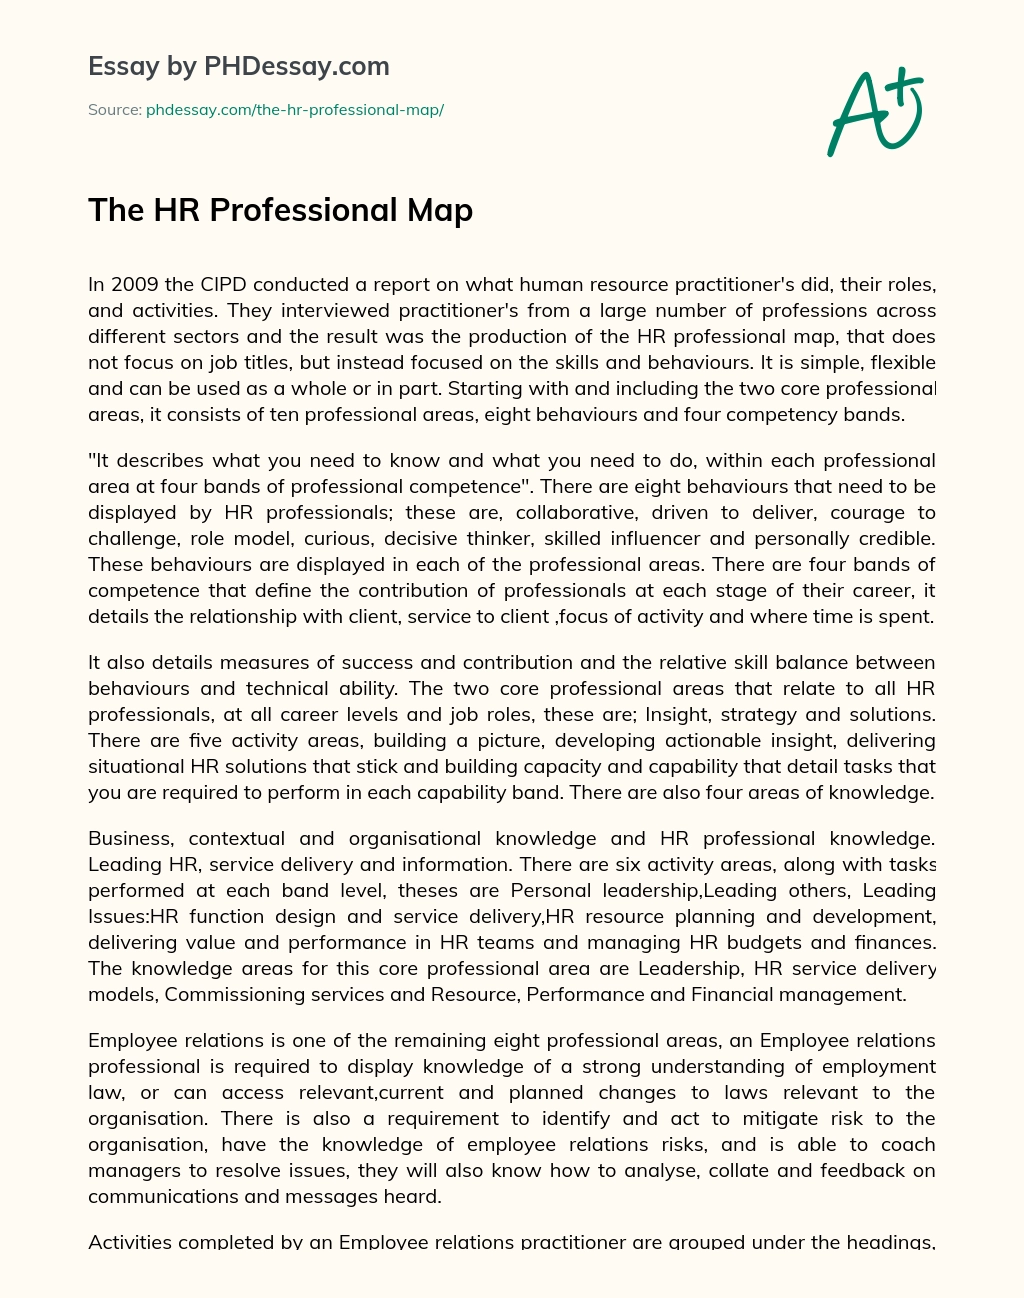 The HR Professional Map essay